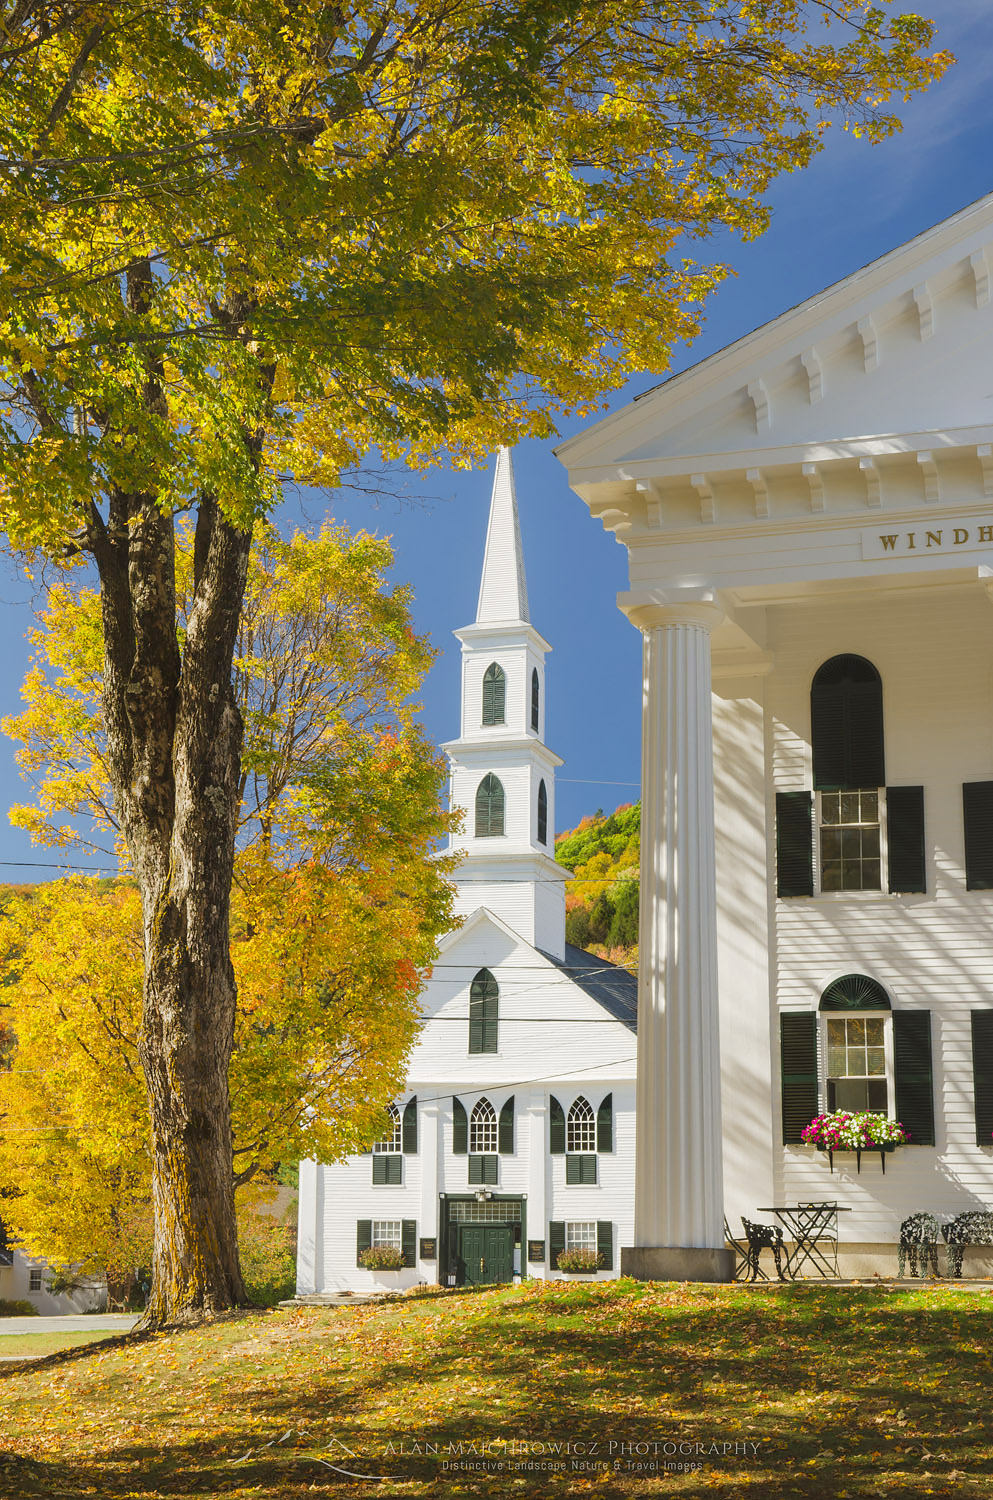 Windham County courthouse and church framed in golden fall foliage, Newfane, Vermont #59466